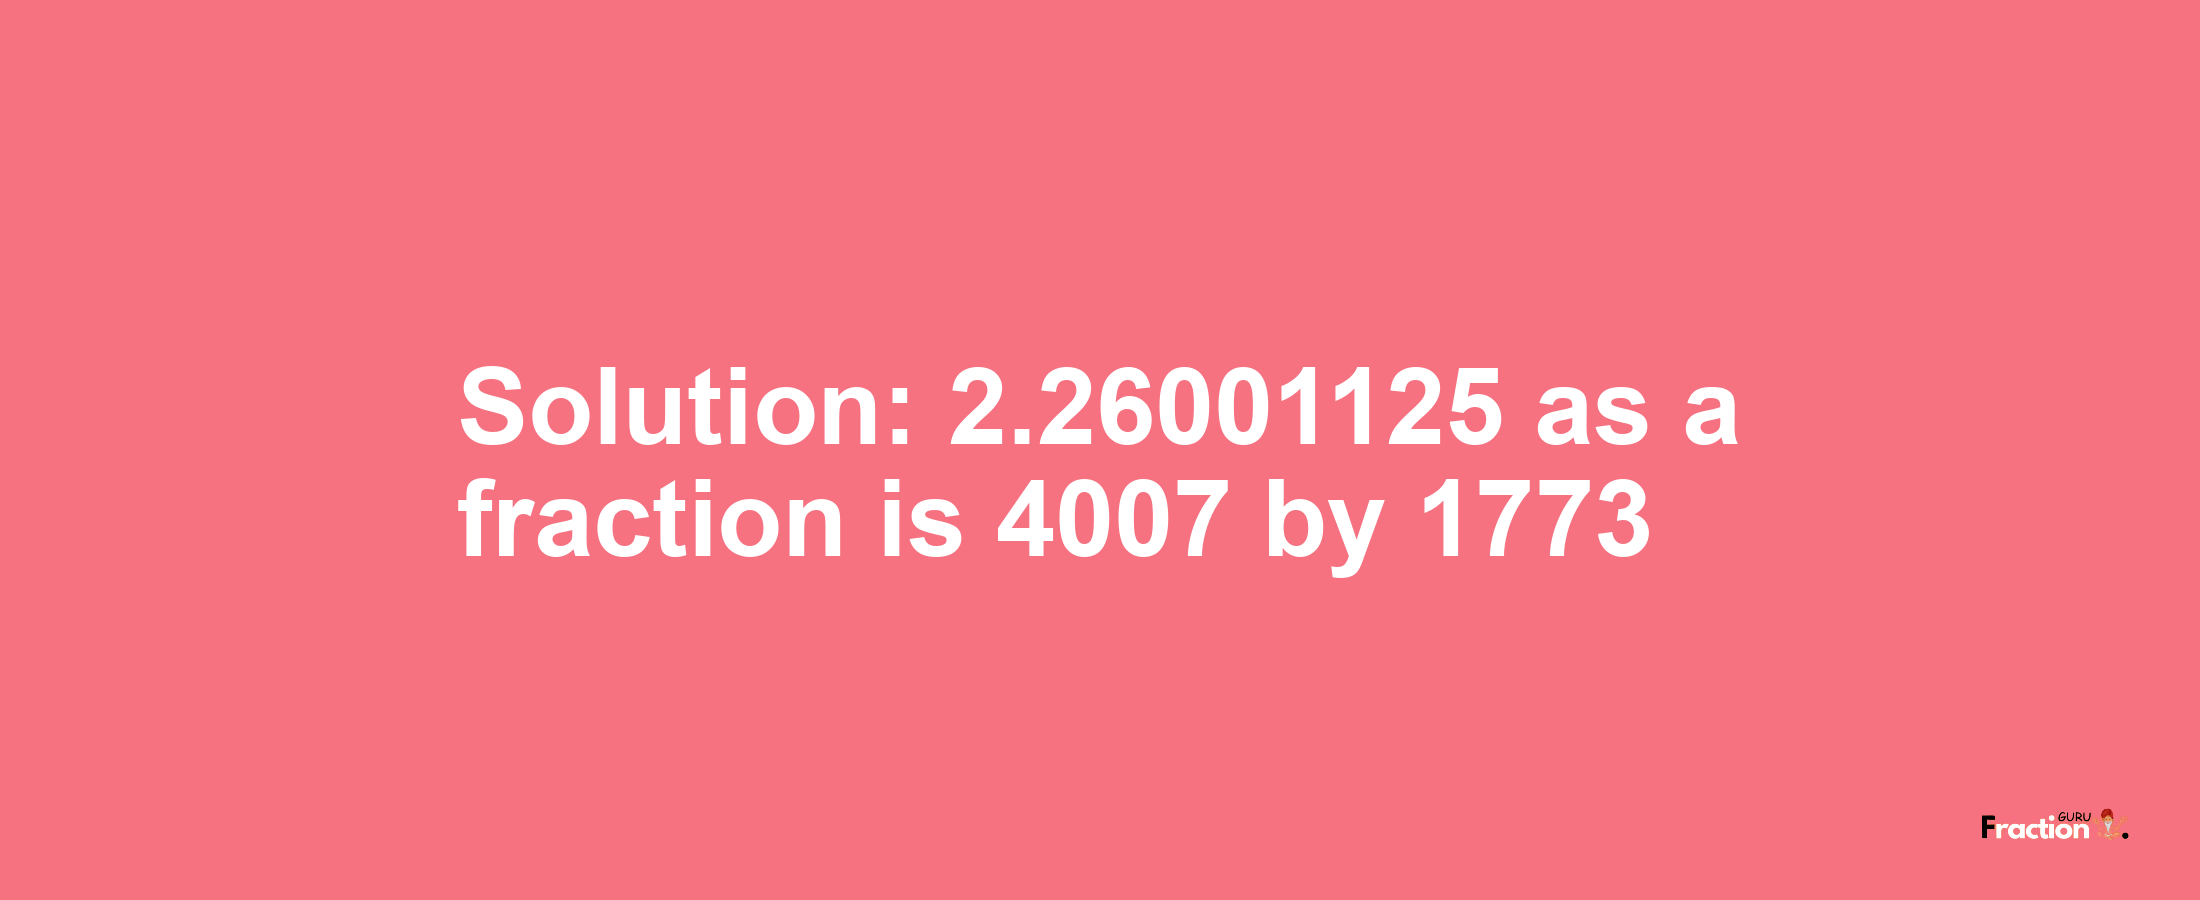 Solution:2.26001125 as a fraction is 4007/1773